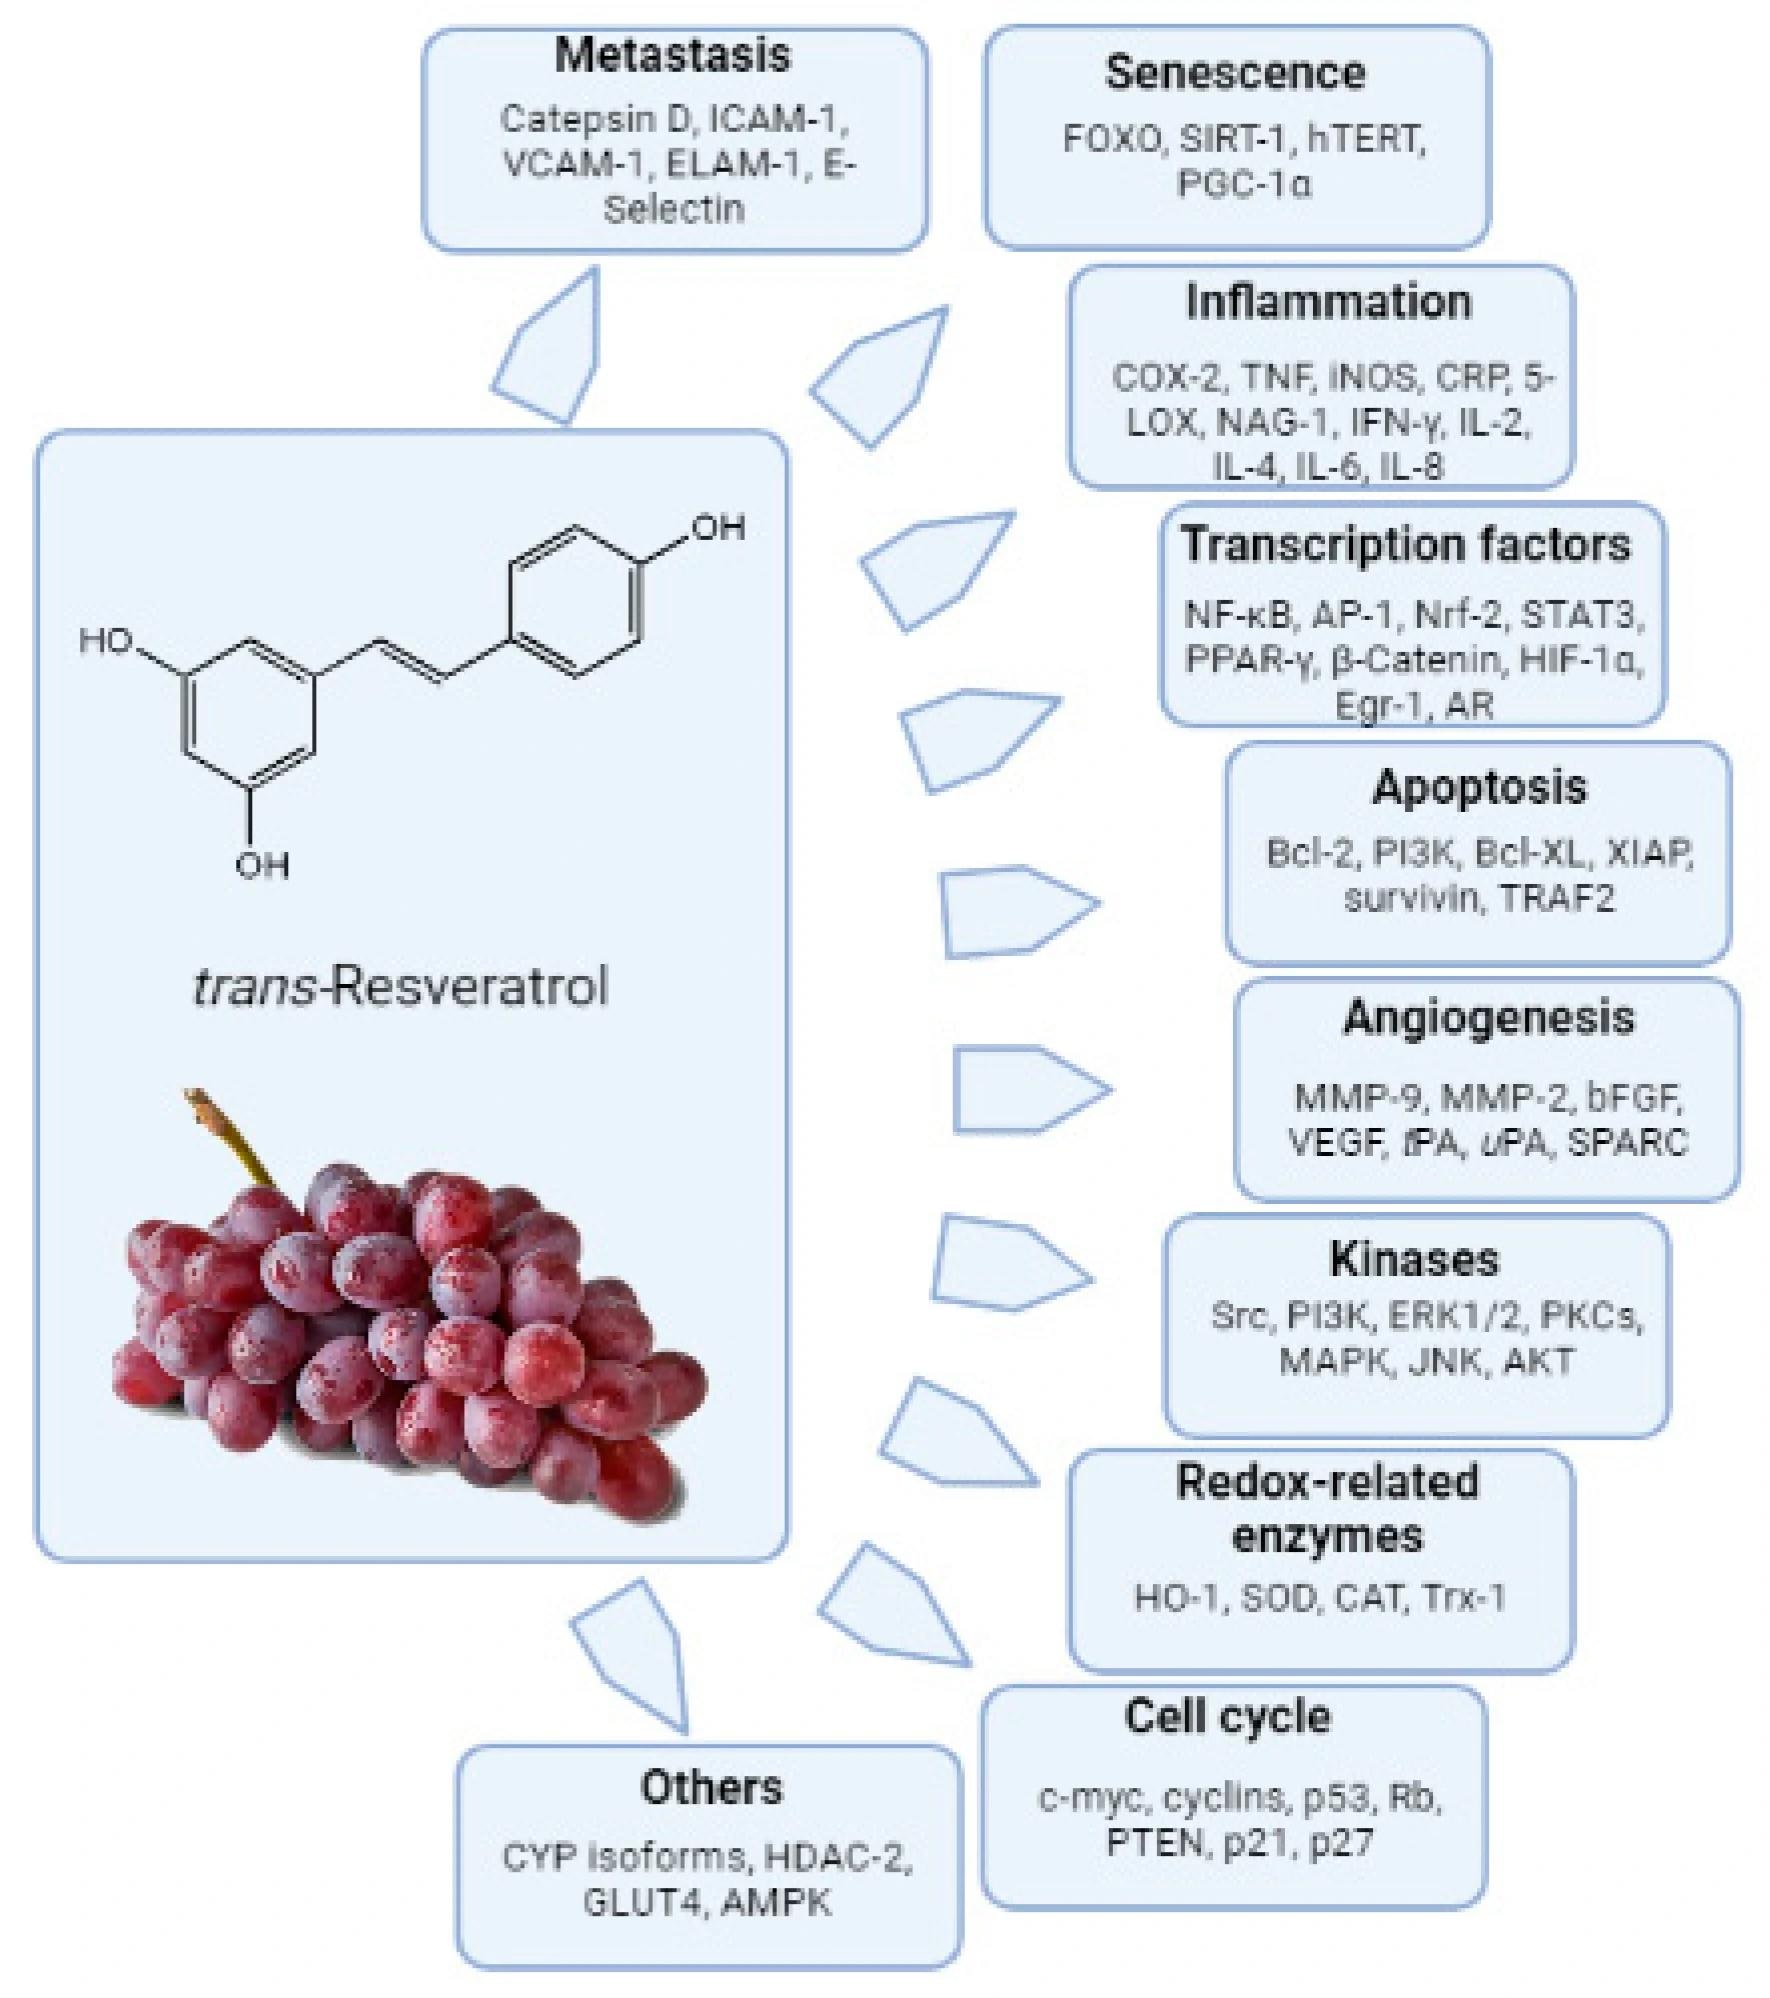 Resveratrol-modulated biochemical targets.  AP-1, activator protein 1;  CAT, catalase;  CDK, cyclin-dependent kinase;  COX, cyclooxygenase;  CRP, C-reactive protein;  CYP, cytochrome P450;  ER, estrogen receptor;  ERK, extracellularly regulated kinase;  GPx, glutathione peroxidase;  HIF, hypoxia-causing factor;  hTERT, human telomerase reverse transcriptase;  ICAM, intracellular adhesion molecule;  IAP, inhibitor of apoptosis proteins;  iNOS, inducible nitric oxide;  MAPK, mitogen-activated protein kinase;  MMP, matrix metalloproteinase;  NFκB, nuclear factor kappa B;  PI3K, phosphoinositide-3 kinase;  Rb, retinoblastoma;  SOD, superoxide dismutase;  STAT, signal converter and transcription activator;  SPARC, secreted protein acidic and rich in cysteine;  TNF, tumor necrosis factor;  VEGF, vascular endothelial growth factor.